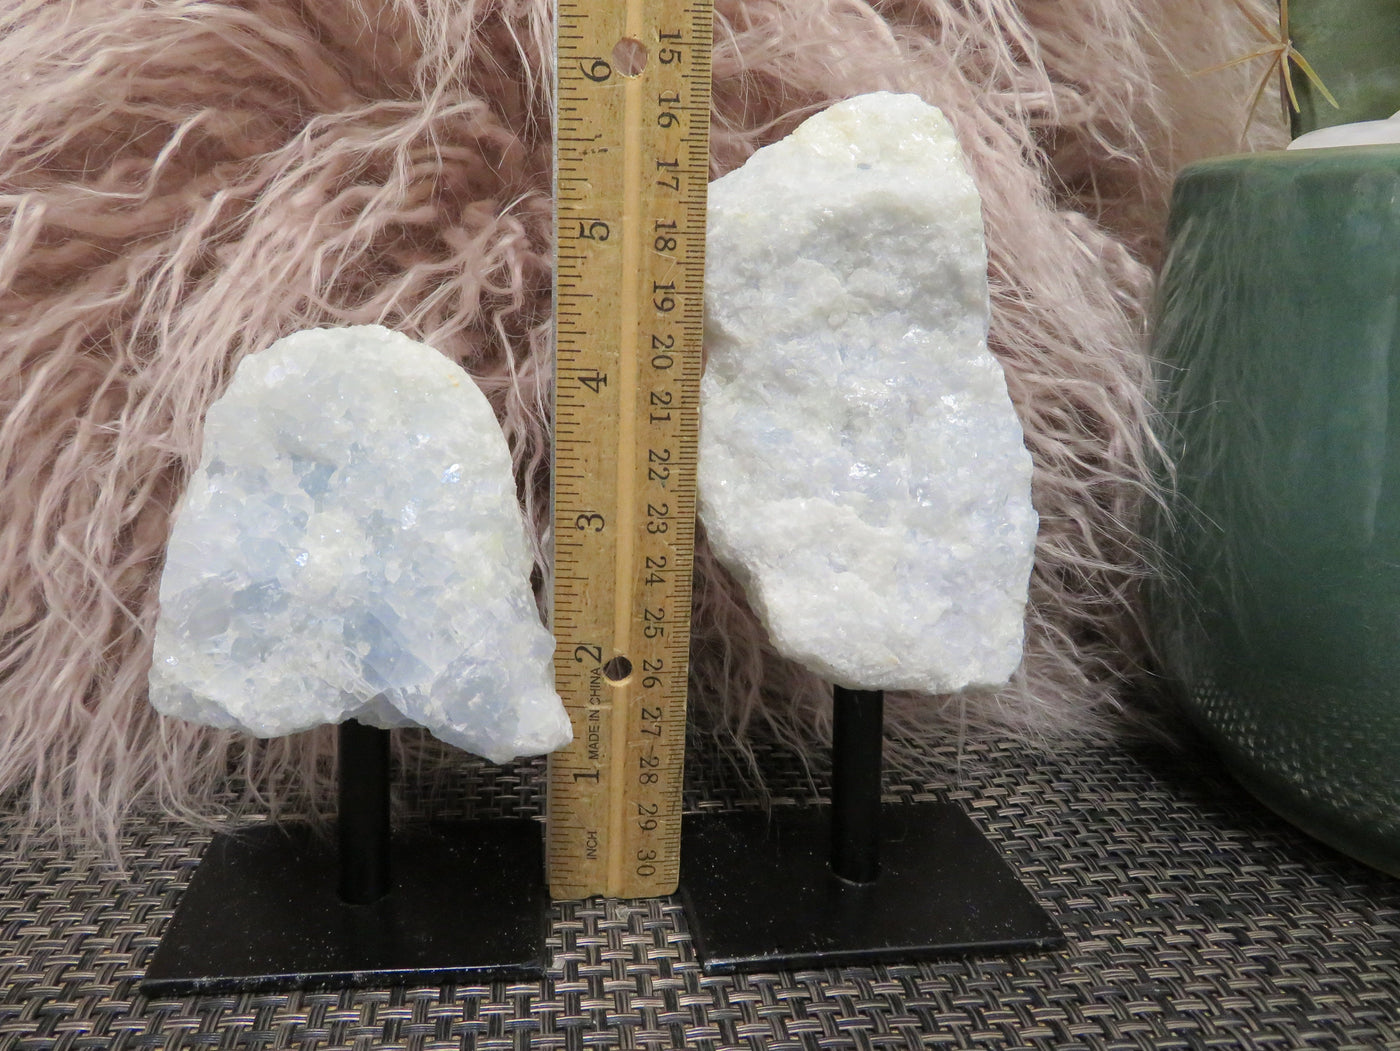 2 blue calcite on stand next to a ruler